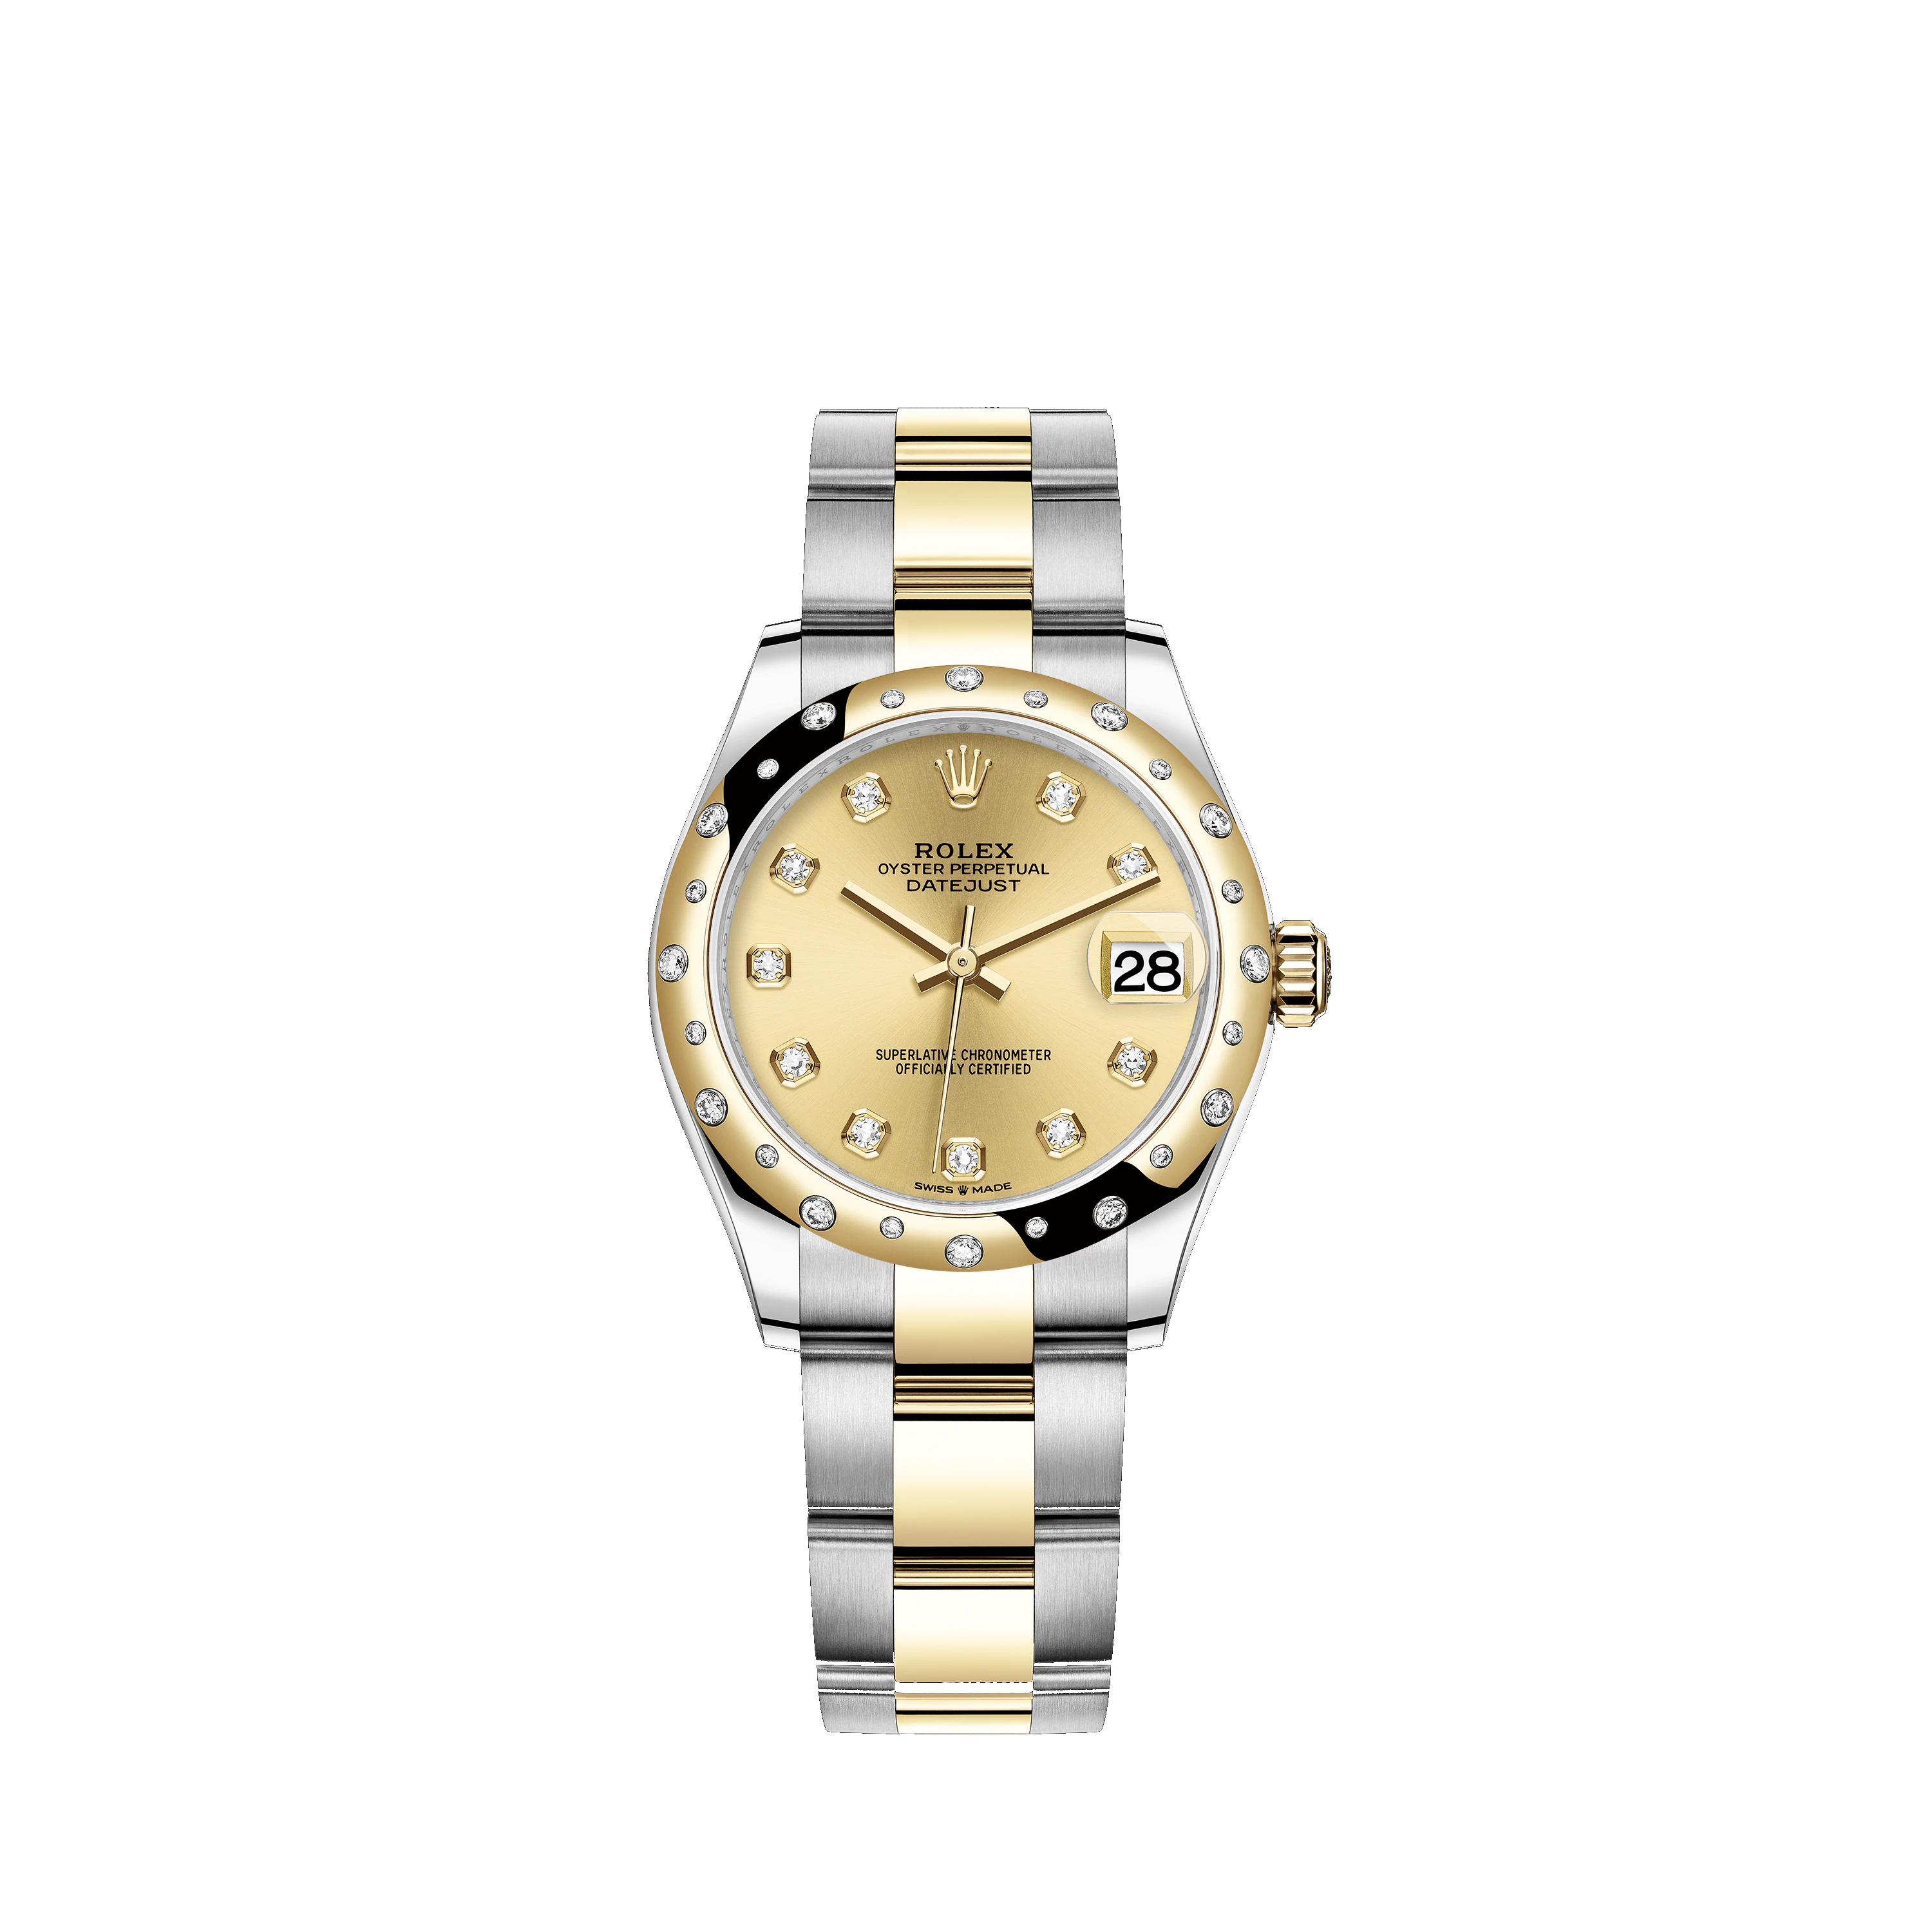 Datejust 31 278343RBR Gold & Stainless Steel Watch (Champagne-Colour Set with Diamonds)